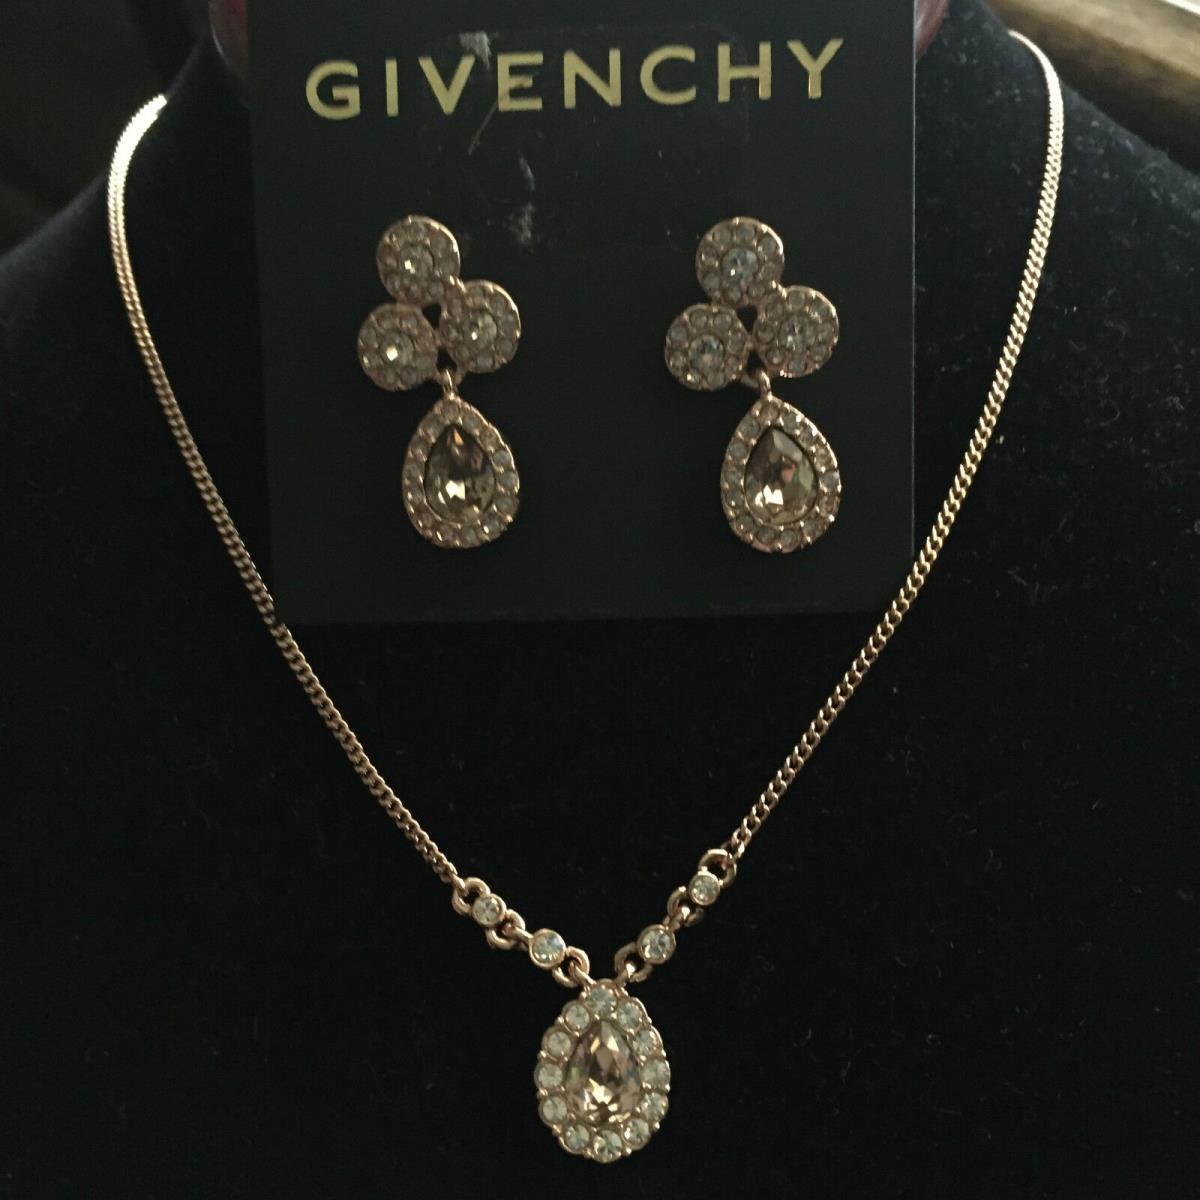 Givenchy Assorted Jewelry Sets --select Your Favorite Rose Gold Earrings + Pendant